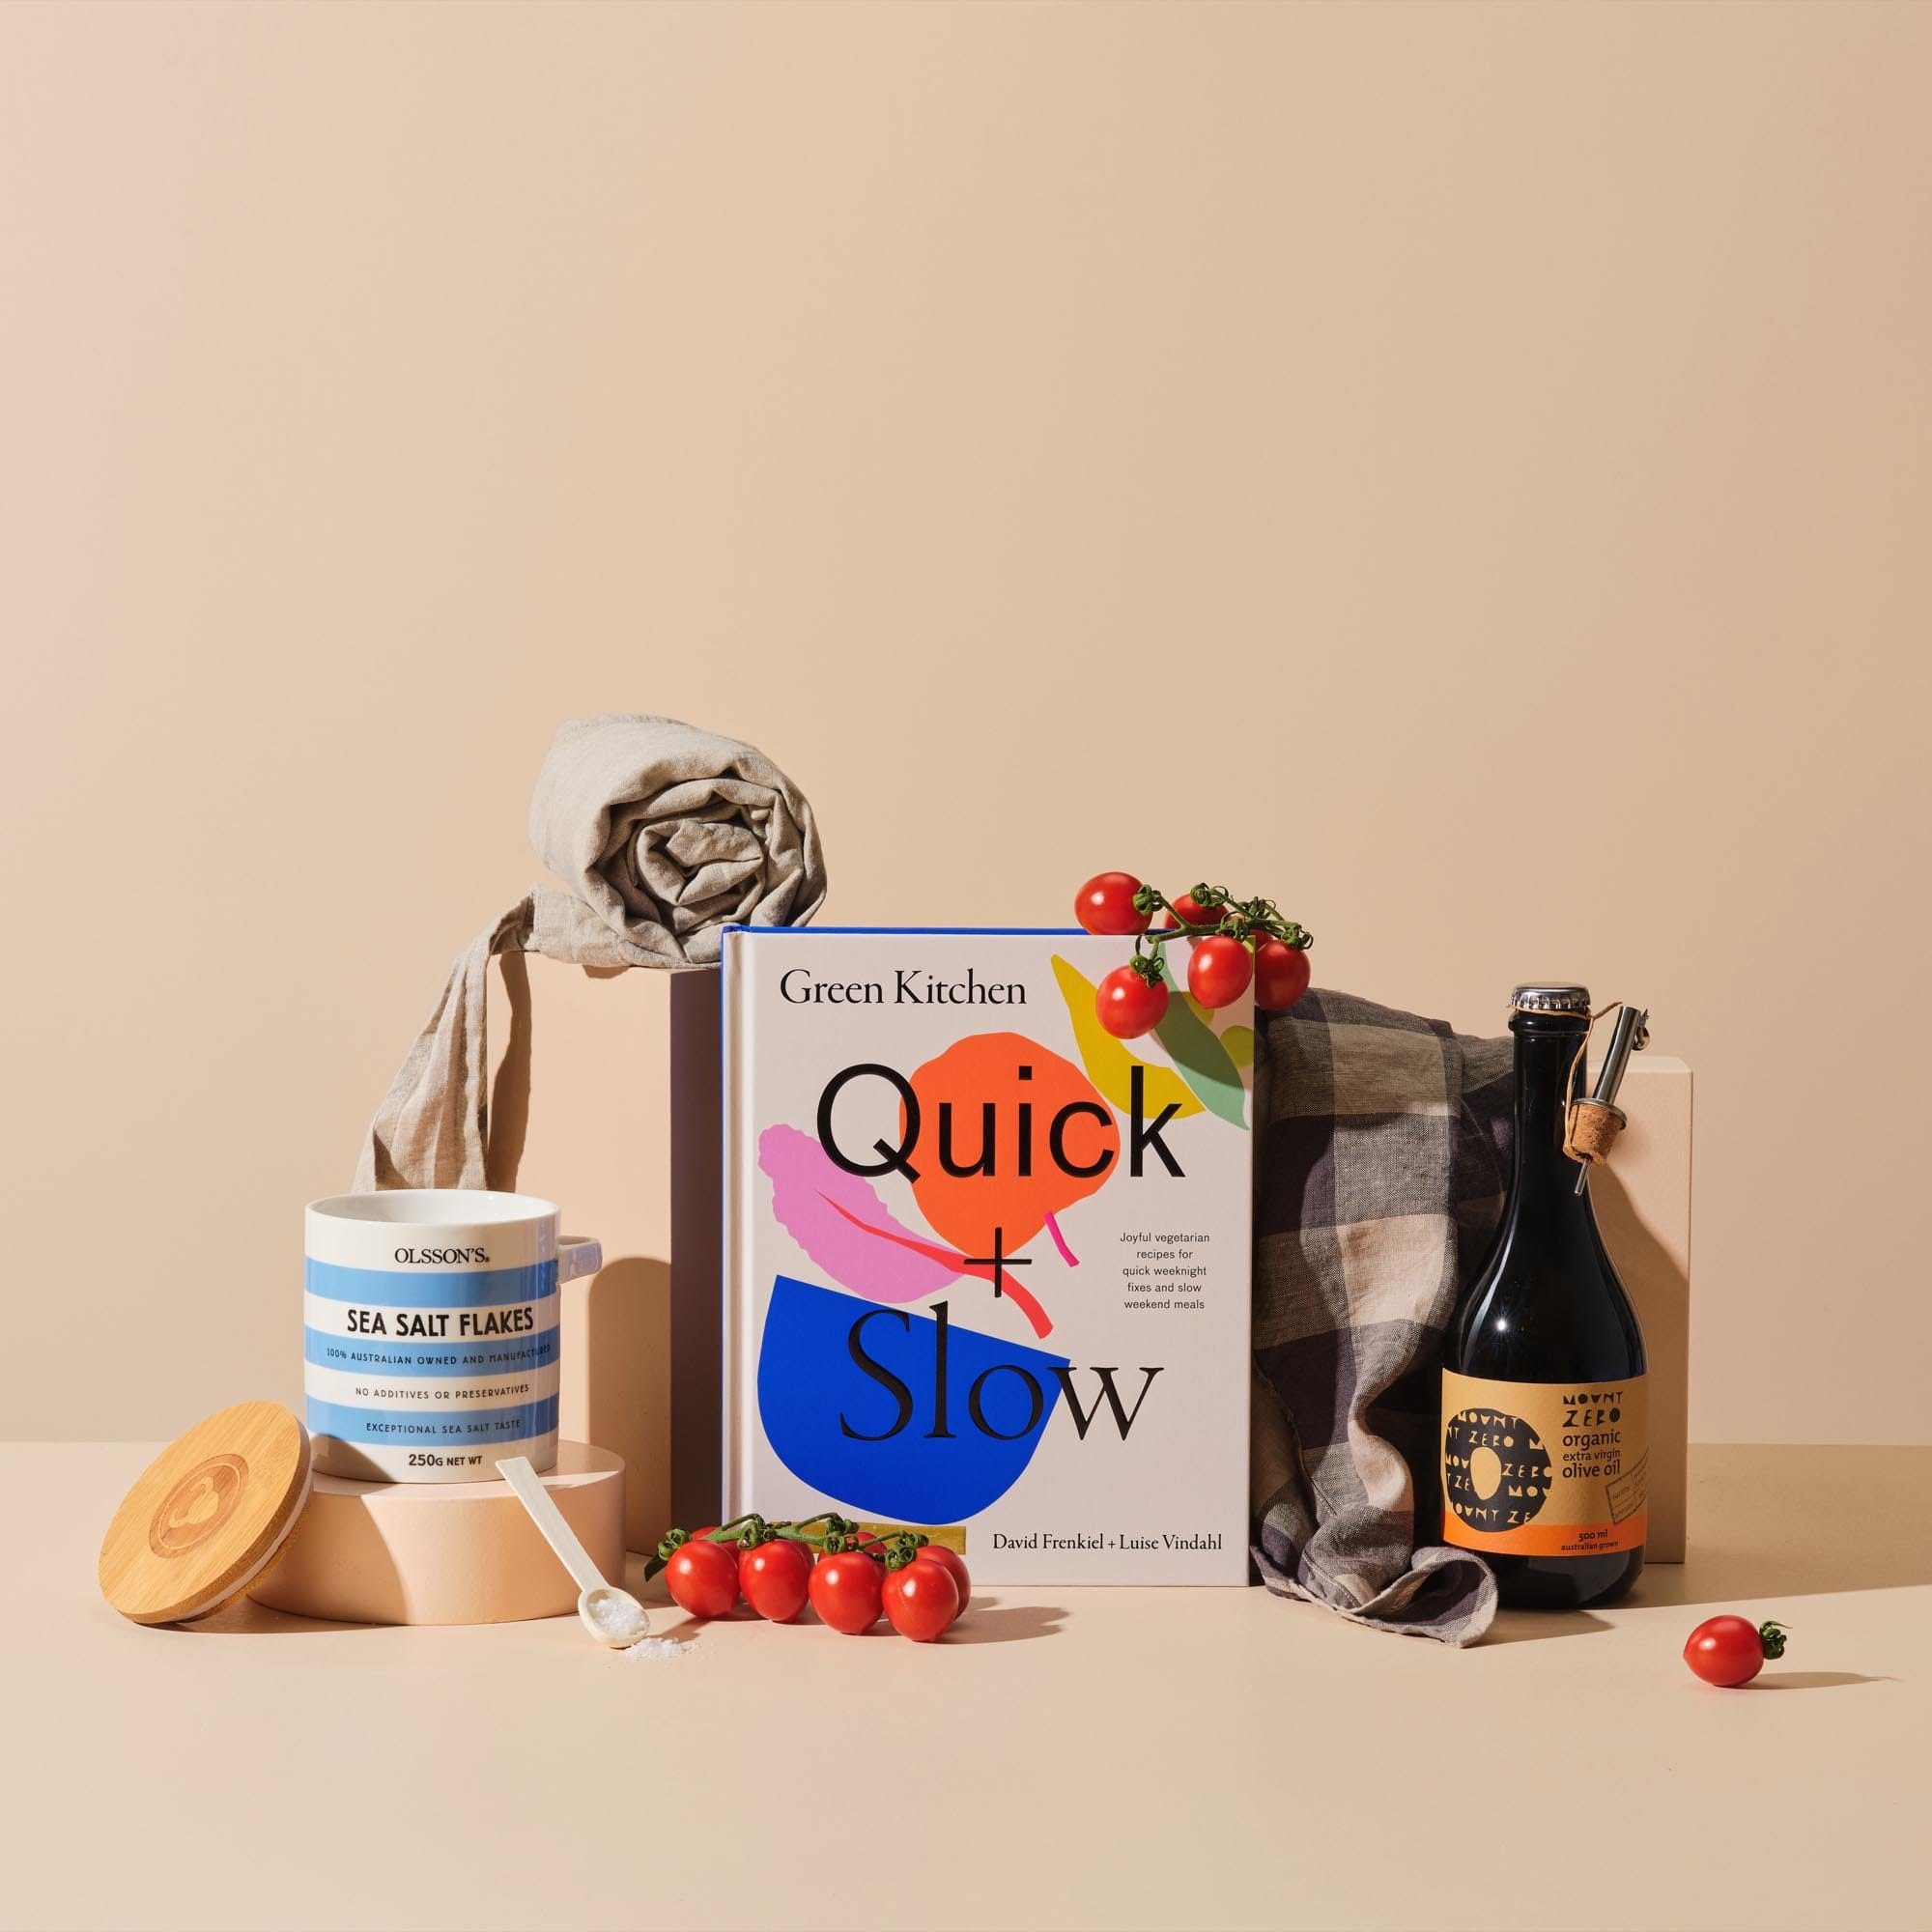 This image displays the gift bundle 'Veg Out' featuring the cover of 'Quick and Slow', Mount Zero Olive Oil, Olsson's Sea Salt Flakes, Linen Tea Towel and Apron, accessorised with red cherry tomatoes. 